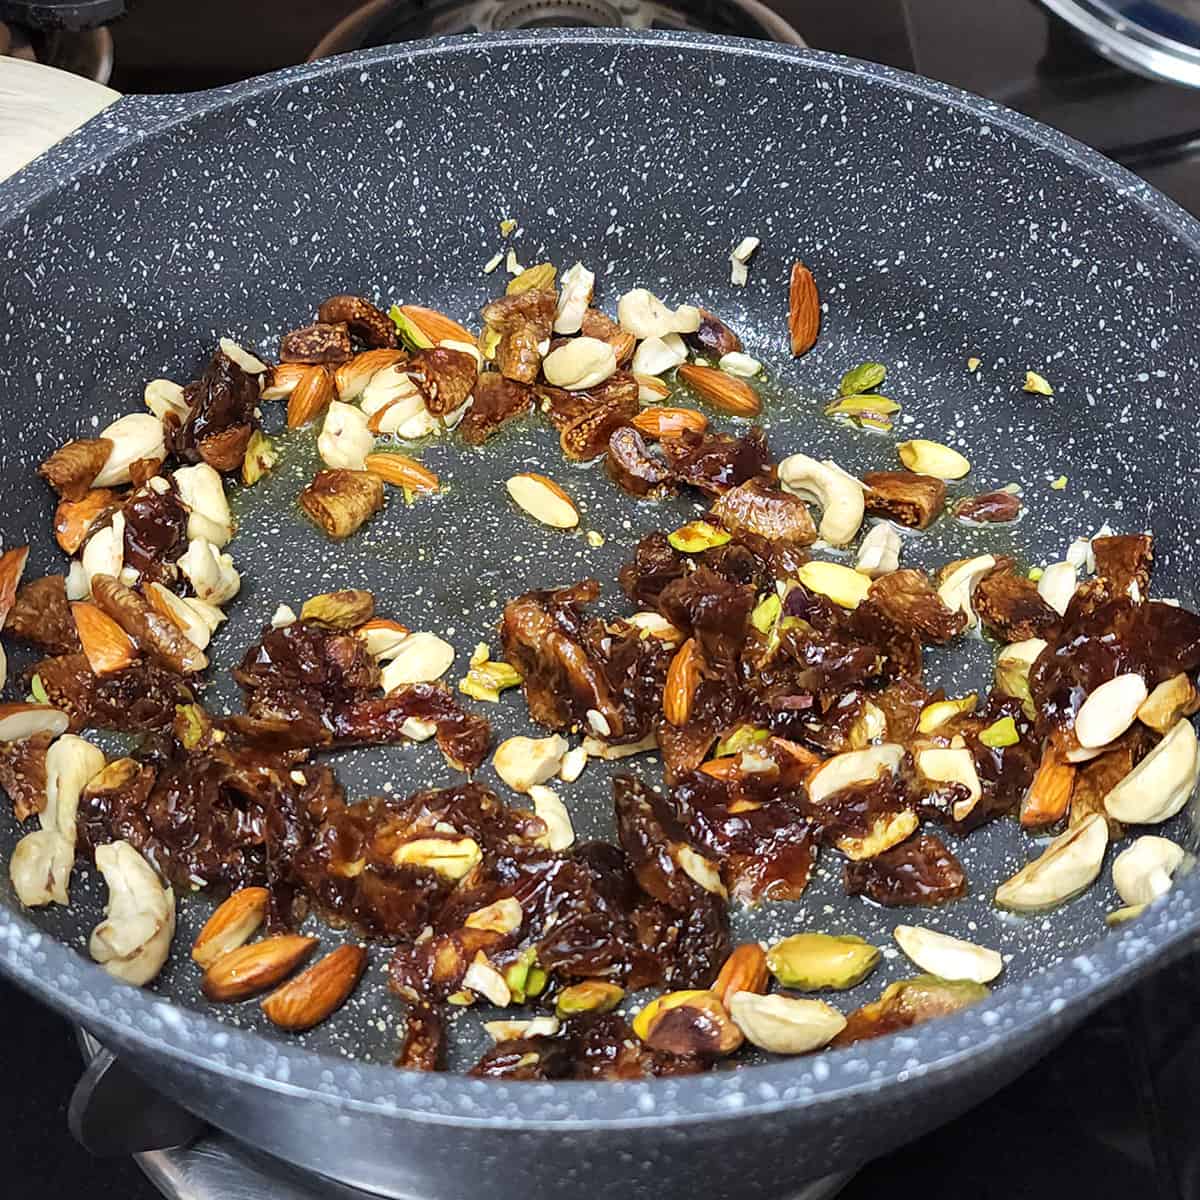 Roast dried fruits and nuts.